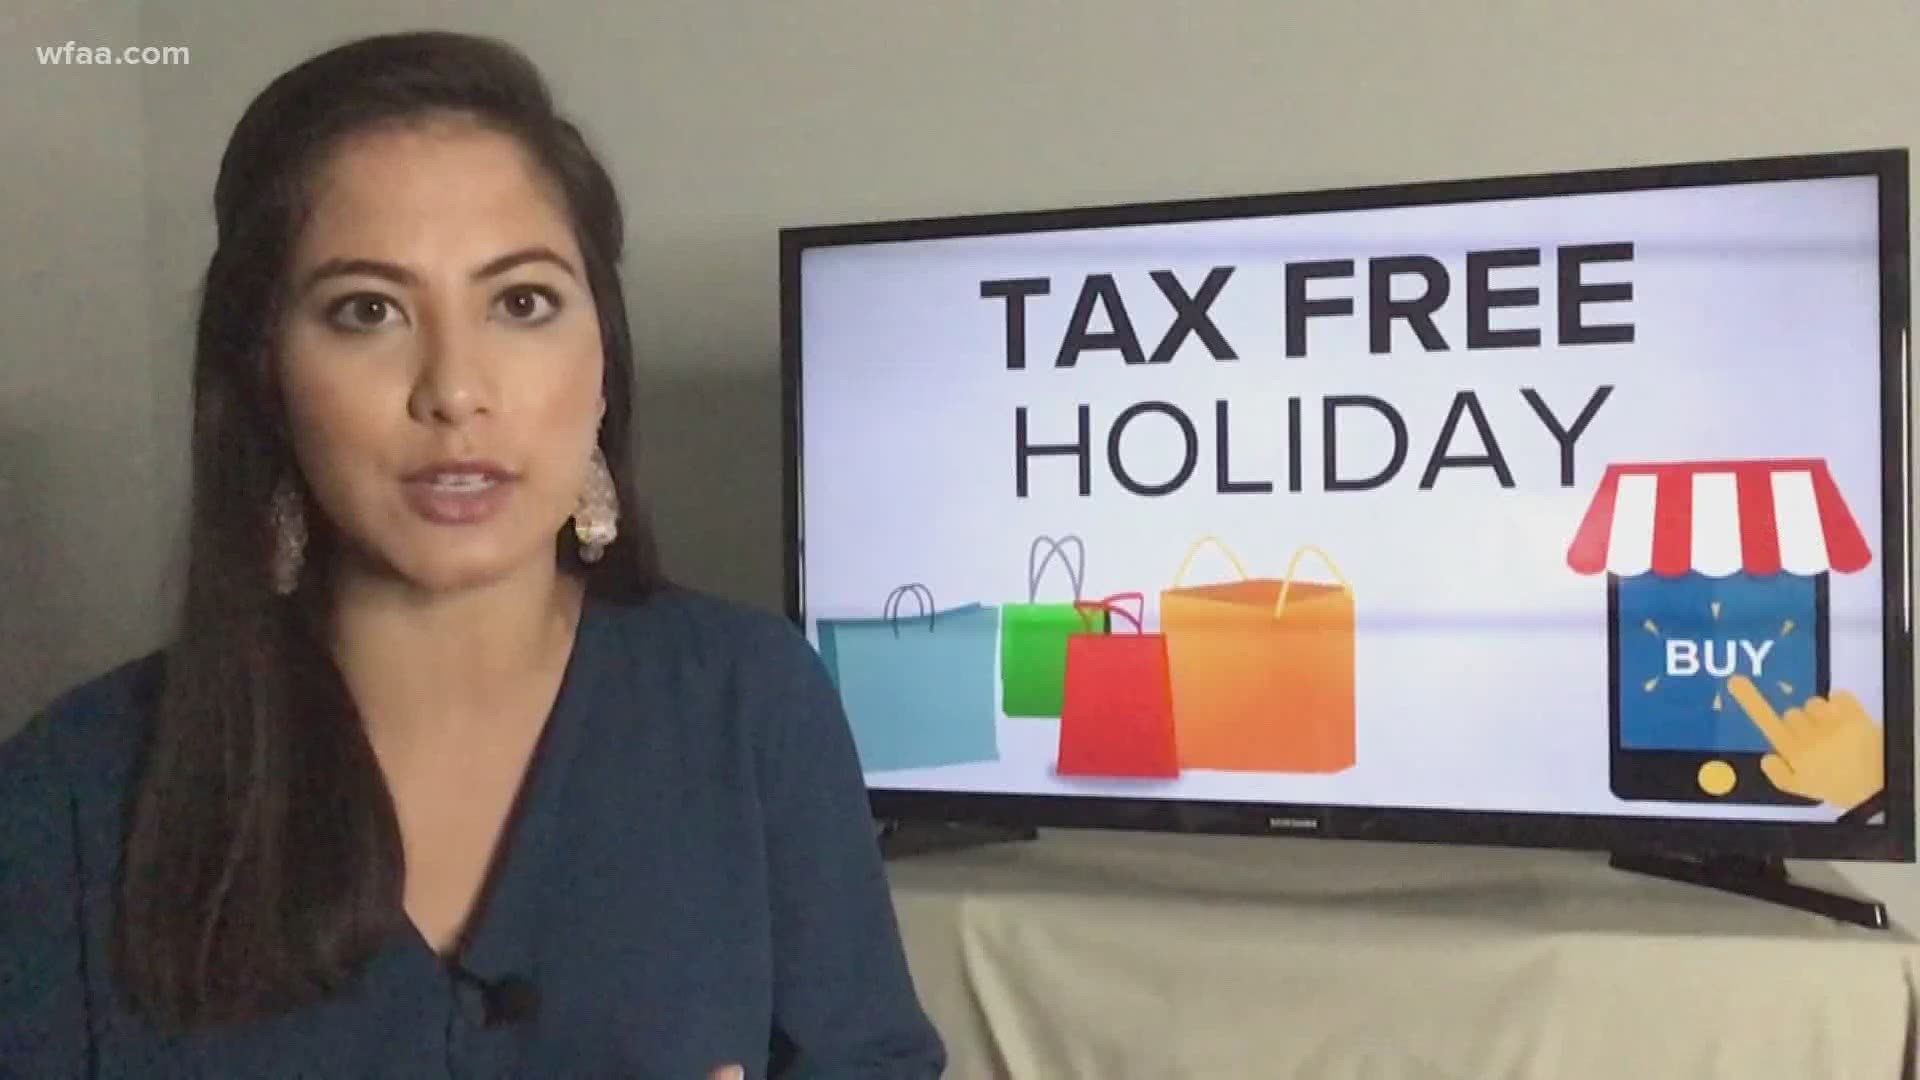 The tax-free holiday begins Friday and ends at midnight Sunday. One general rule when shopping is that the item itself has to be less than $100 to qualify.